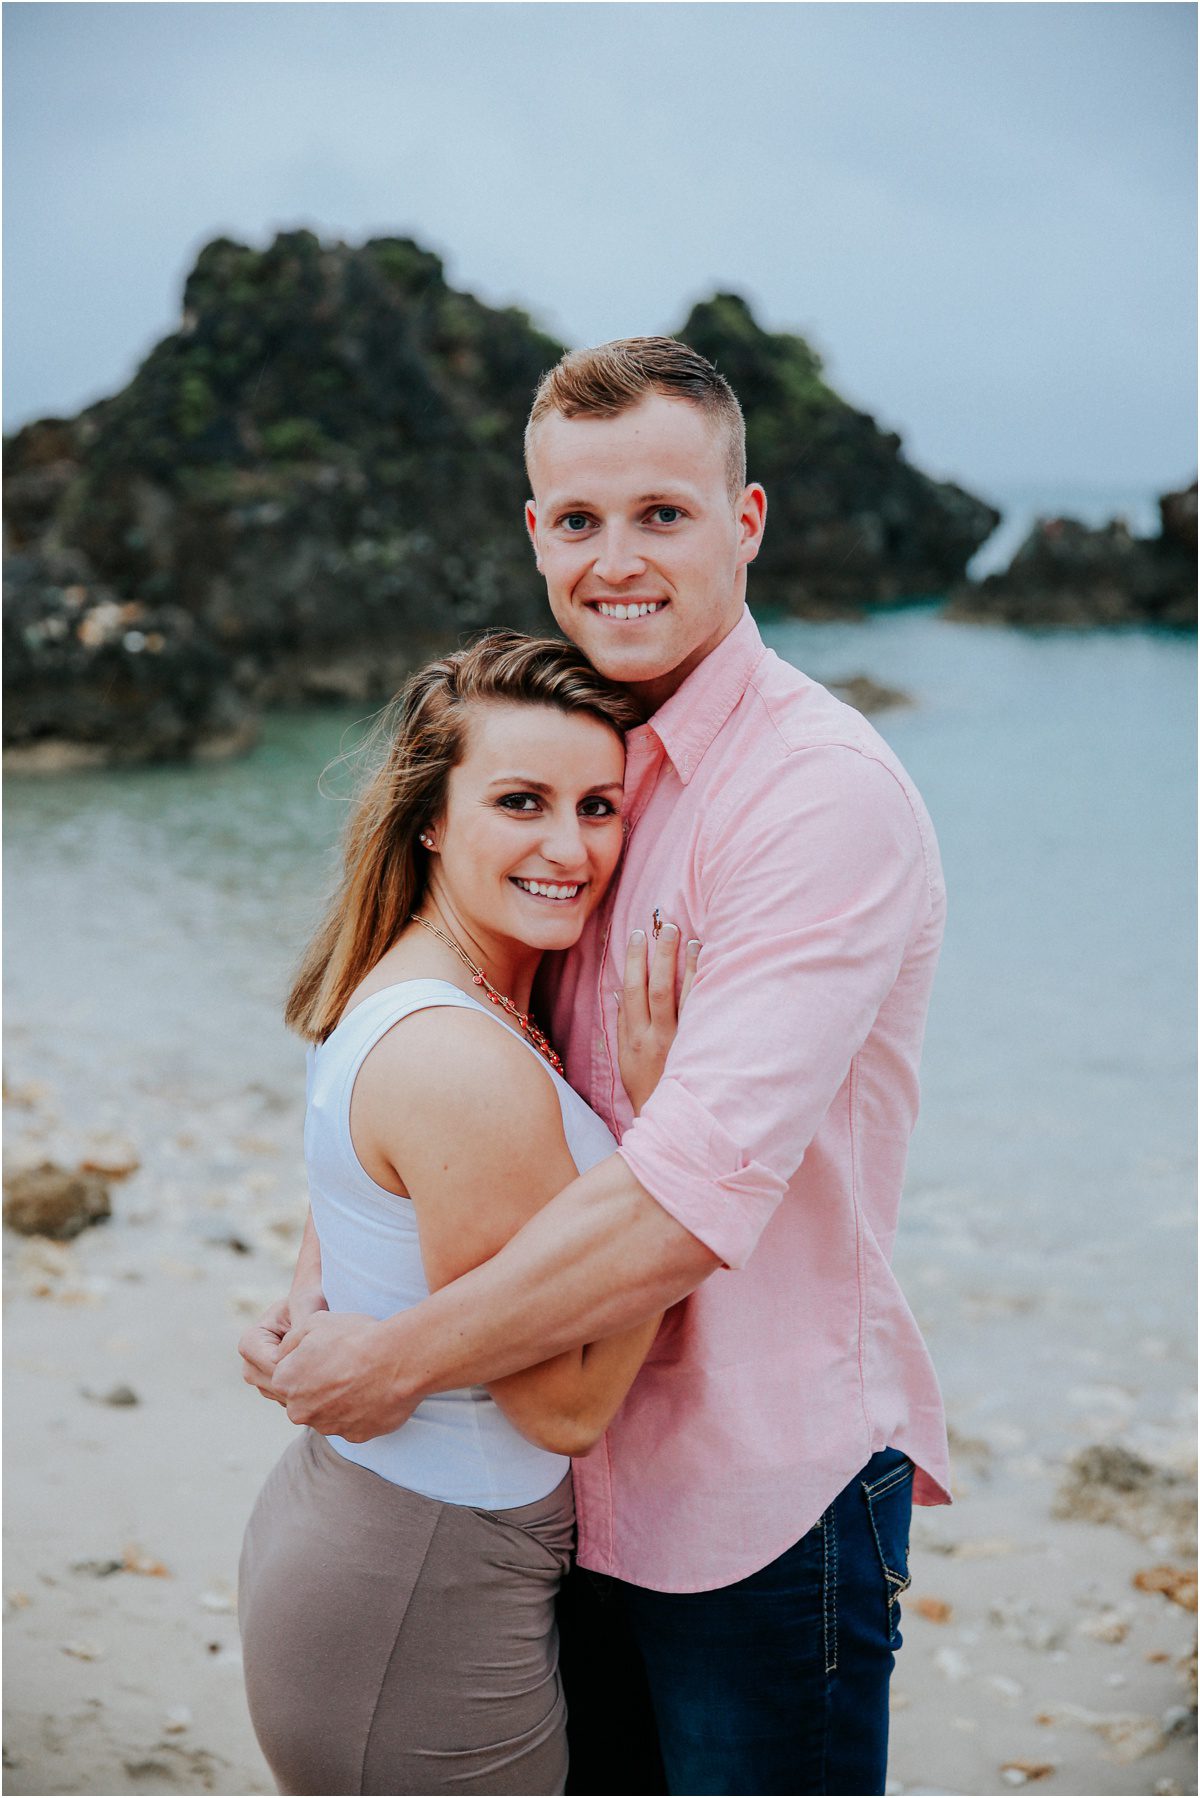 Local engagement photographer, Bloomsburg, PA Proposal Photographer